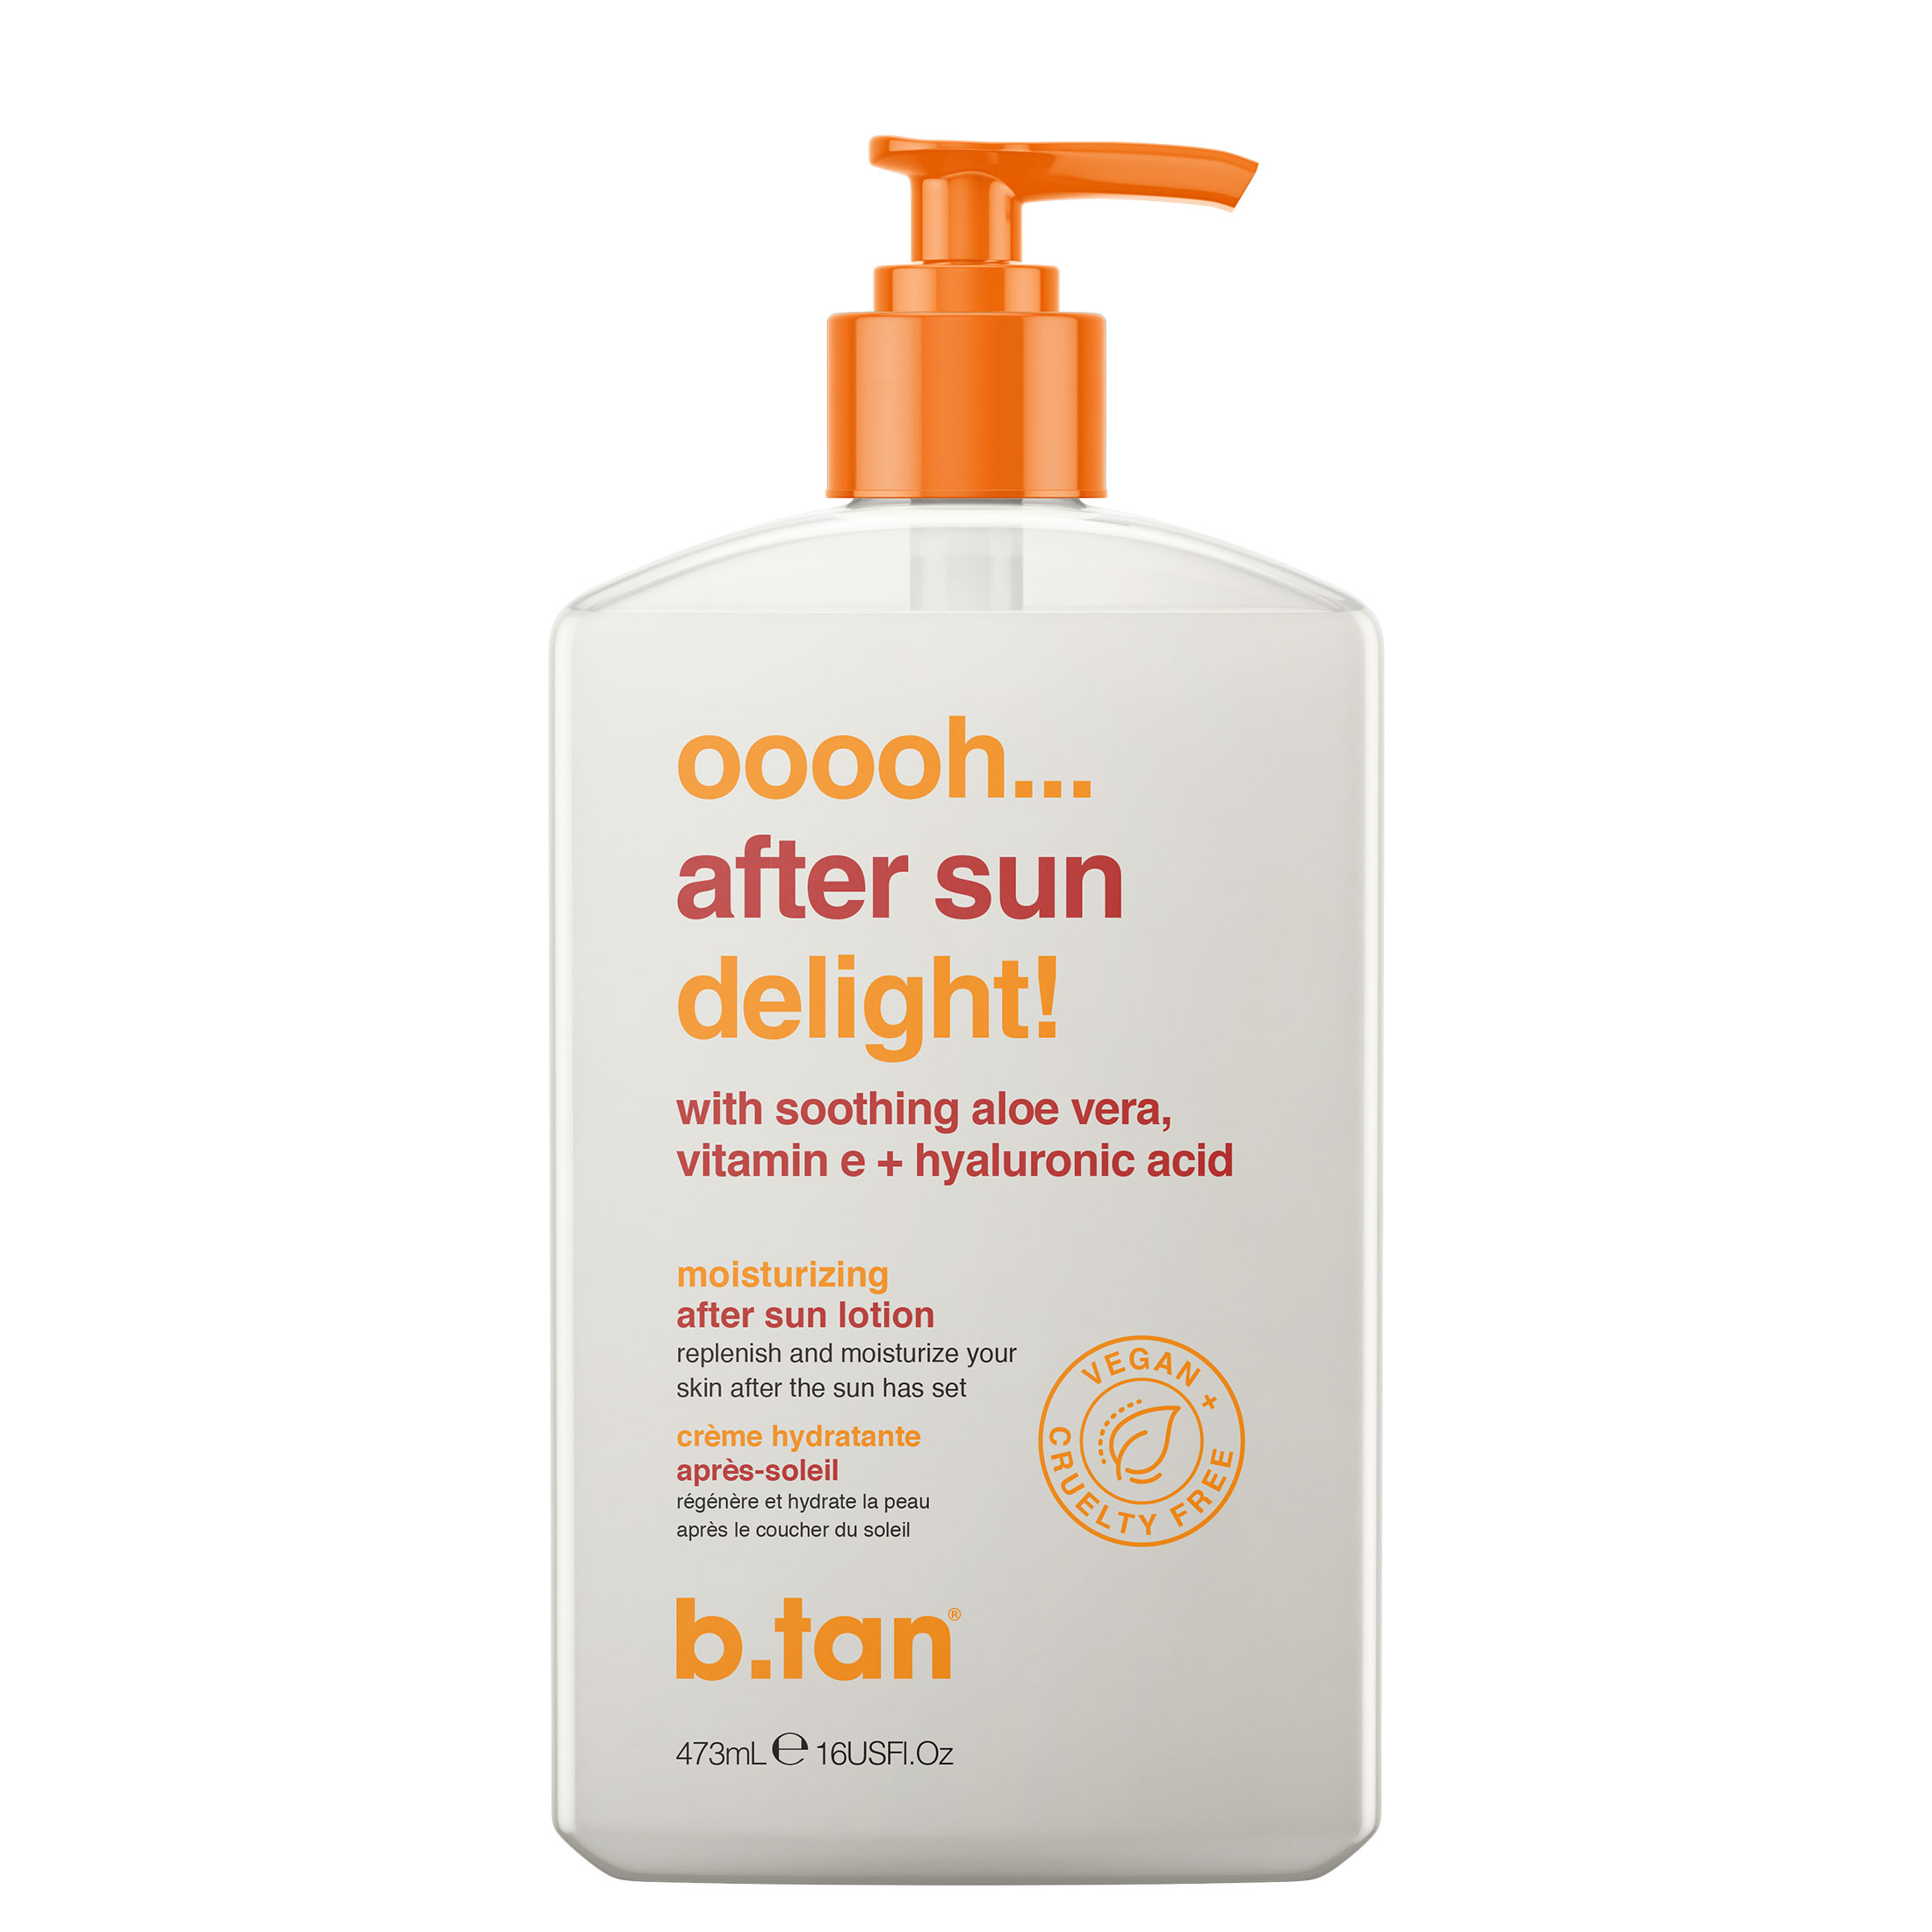 b.tan ooooh aftersun delight - aftersun lotion, 16 fl oz - image 1 of 5